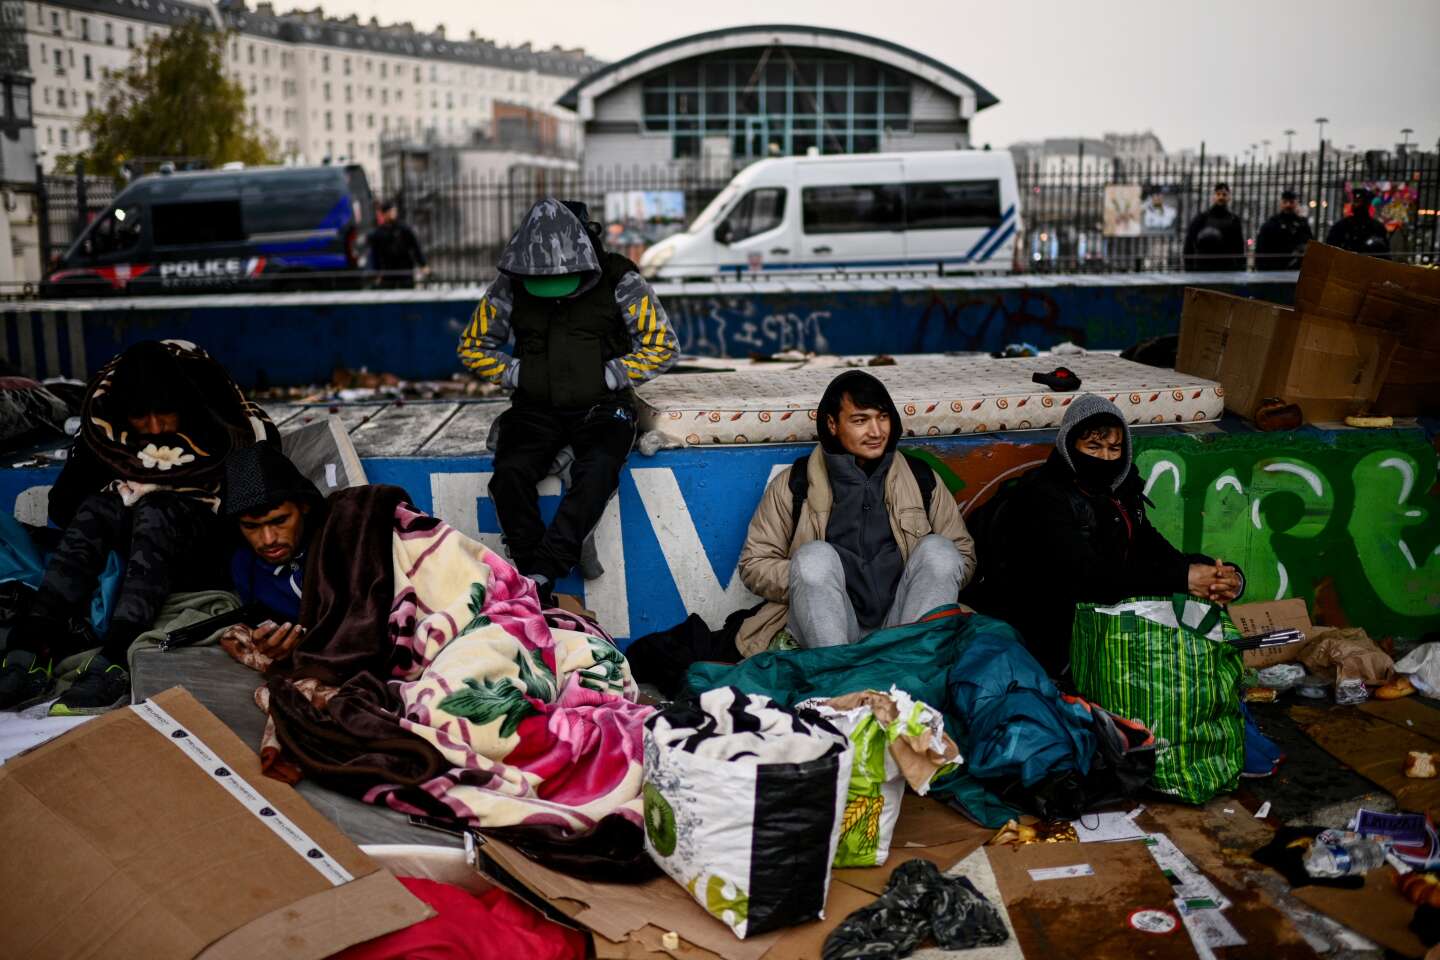 the government’s plan to better guide asylum seekers outside the Paris region